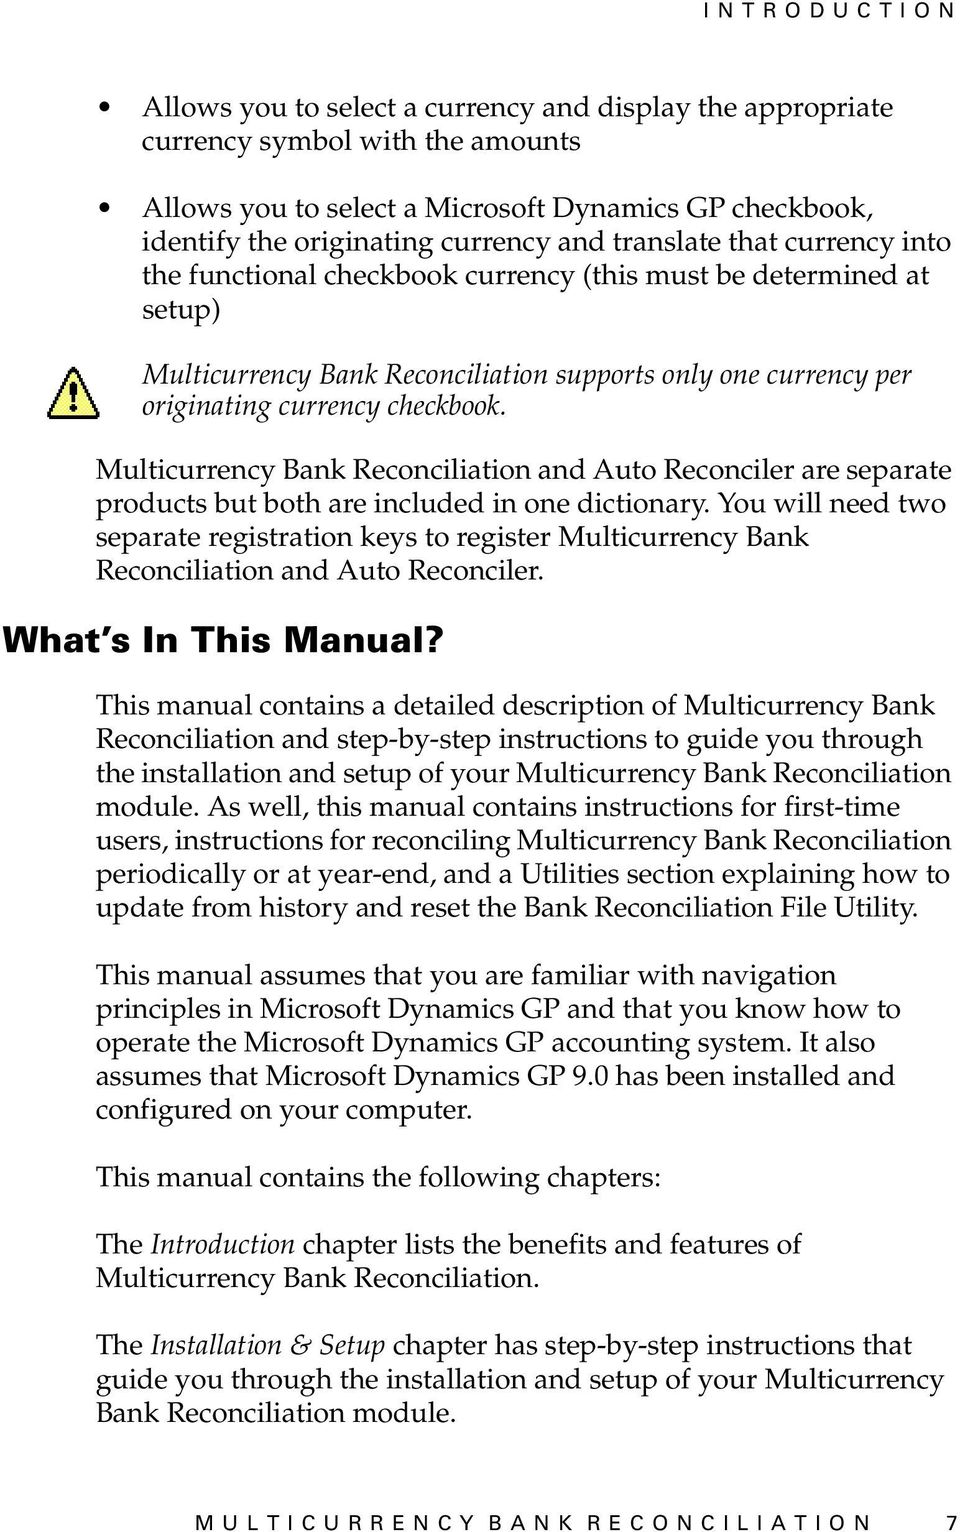 Multicurrency Bank Reconciliation and Auto Reconciler are separate products but both are included in one dictionary.